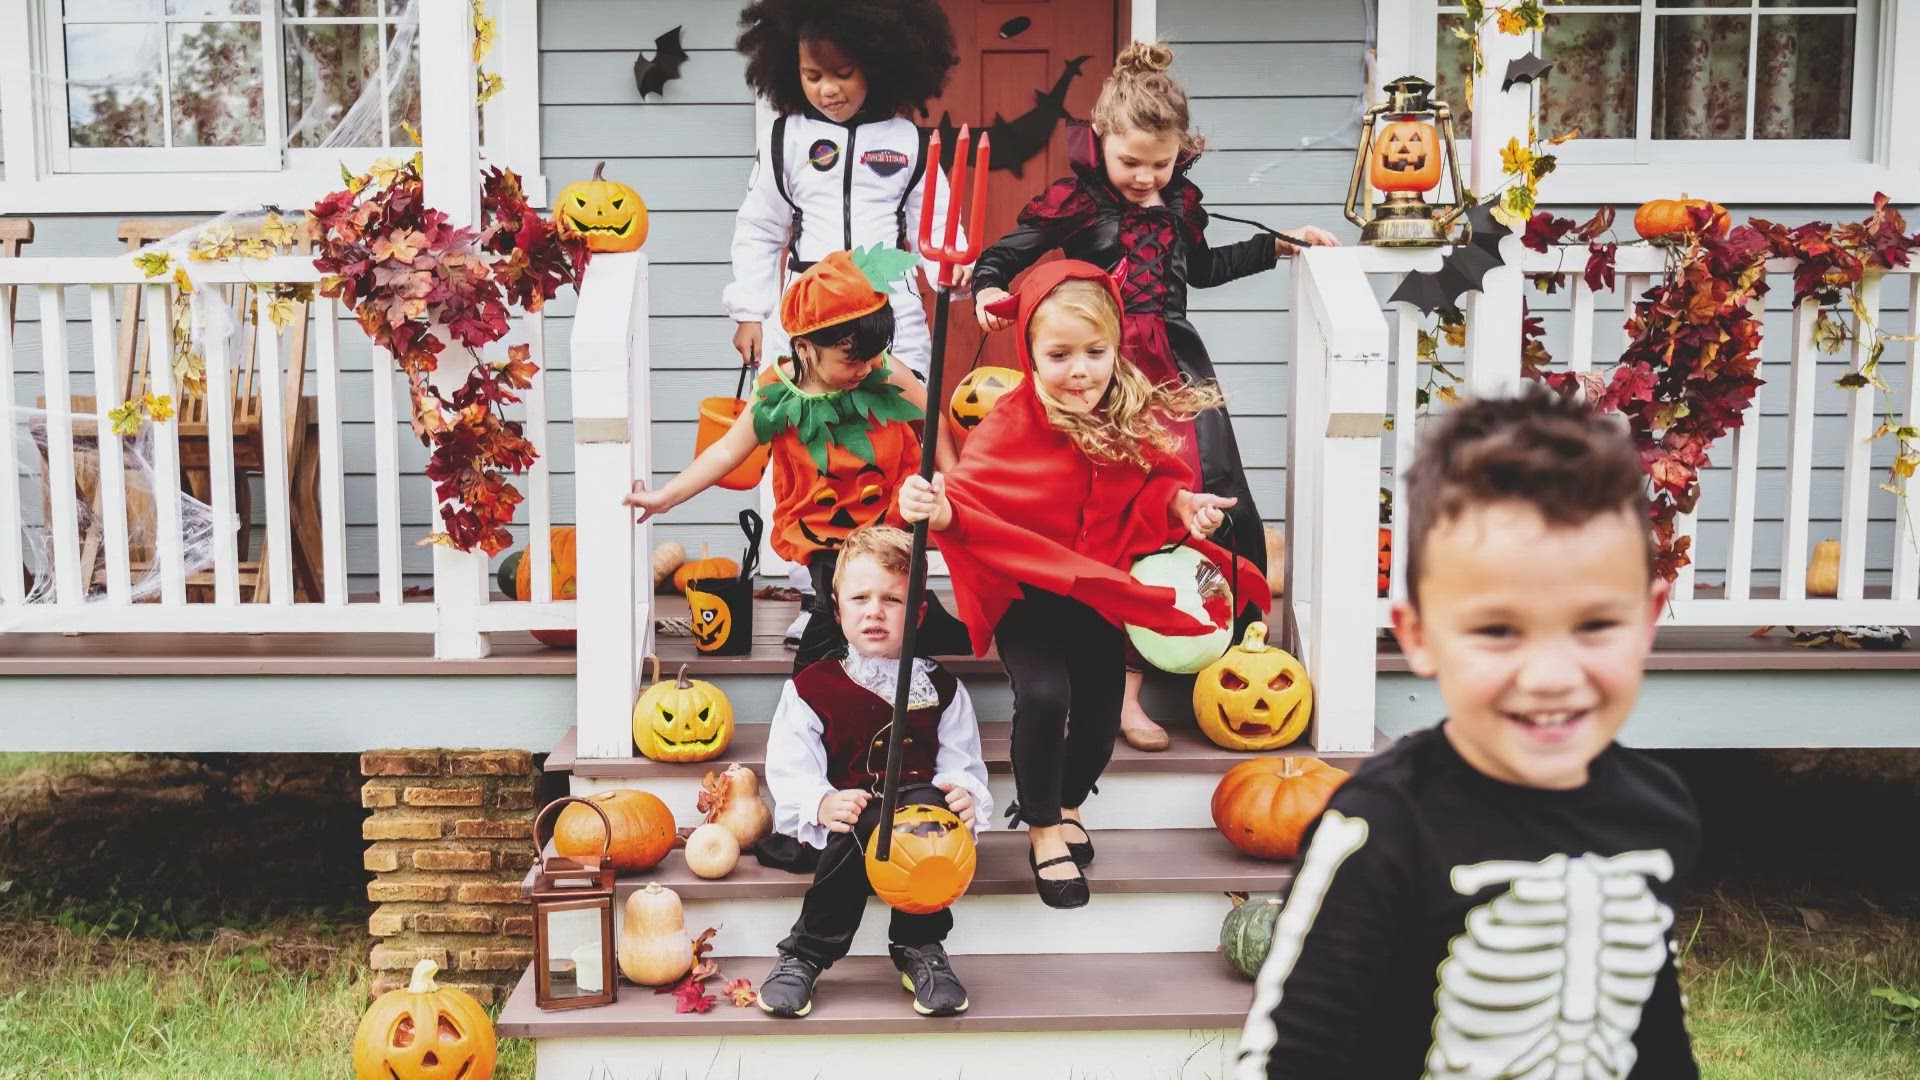 Kids are working on their Halloween jokes ahead of trick-or-treating. It's a tradition that's "so St. Louis." Send your best Halloween jokes to mli@ksdk.com.